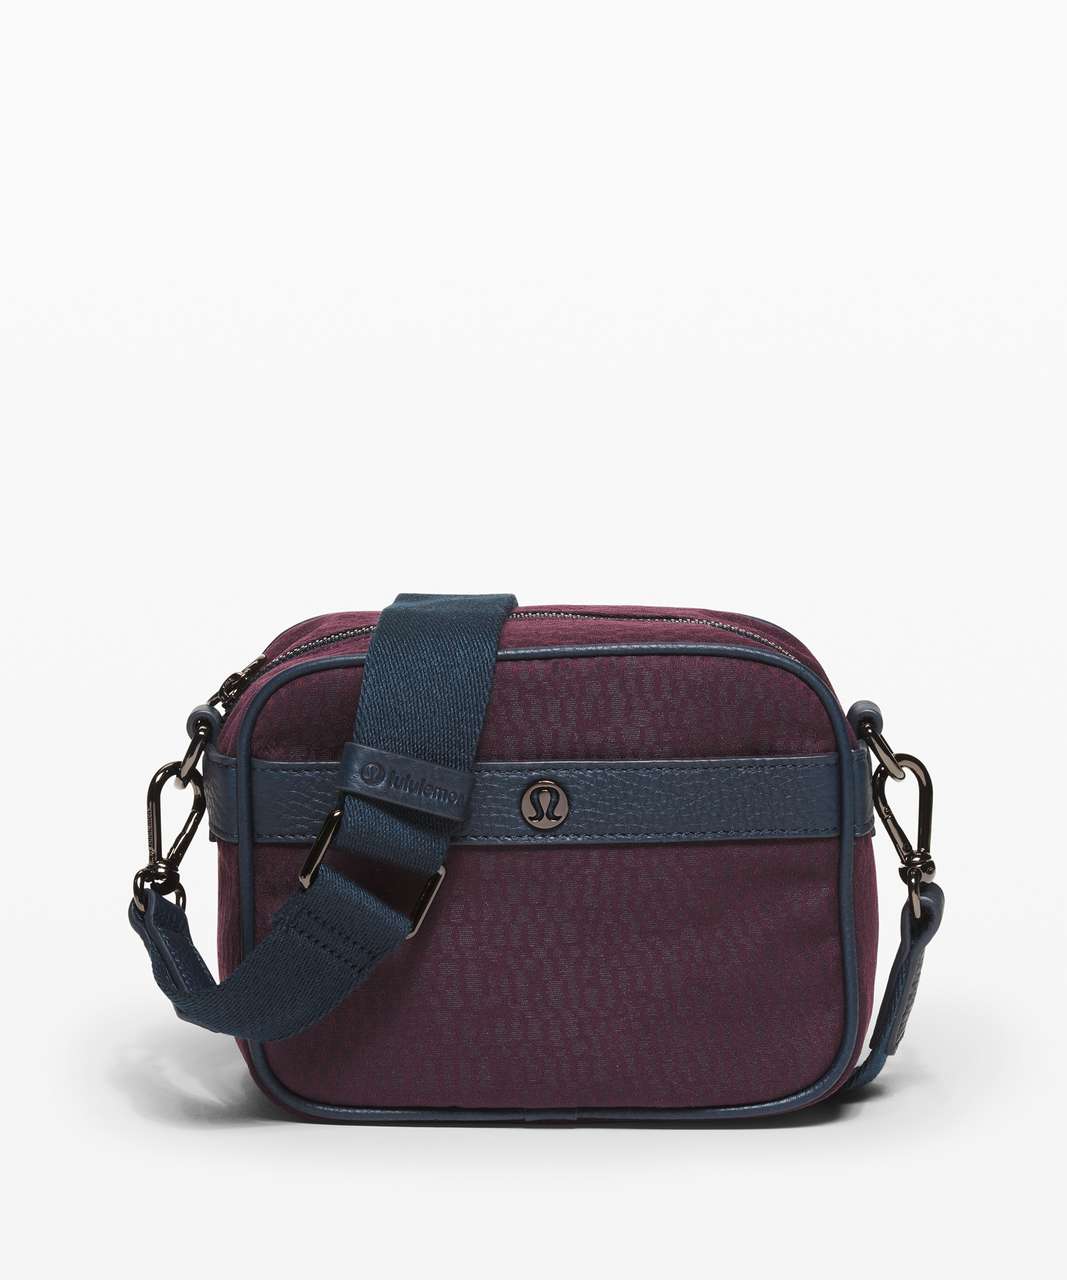 Lululemon Now and Always Crossbody *Mini 3L - Stacked Jacquard Black Cherry Nocturnal Teal